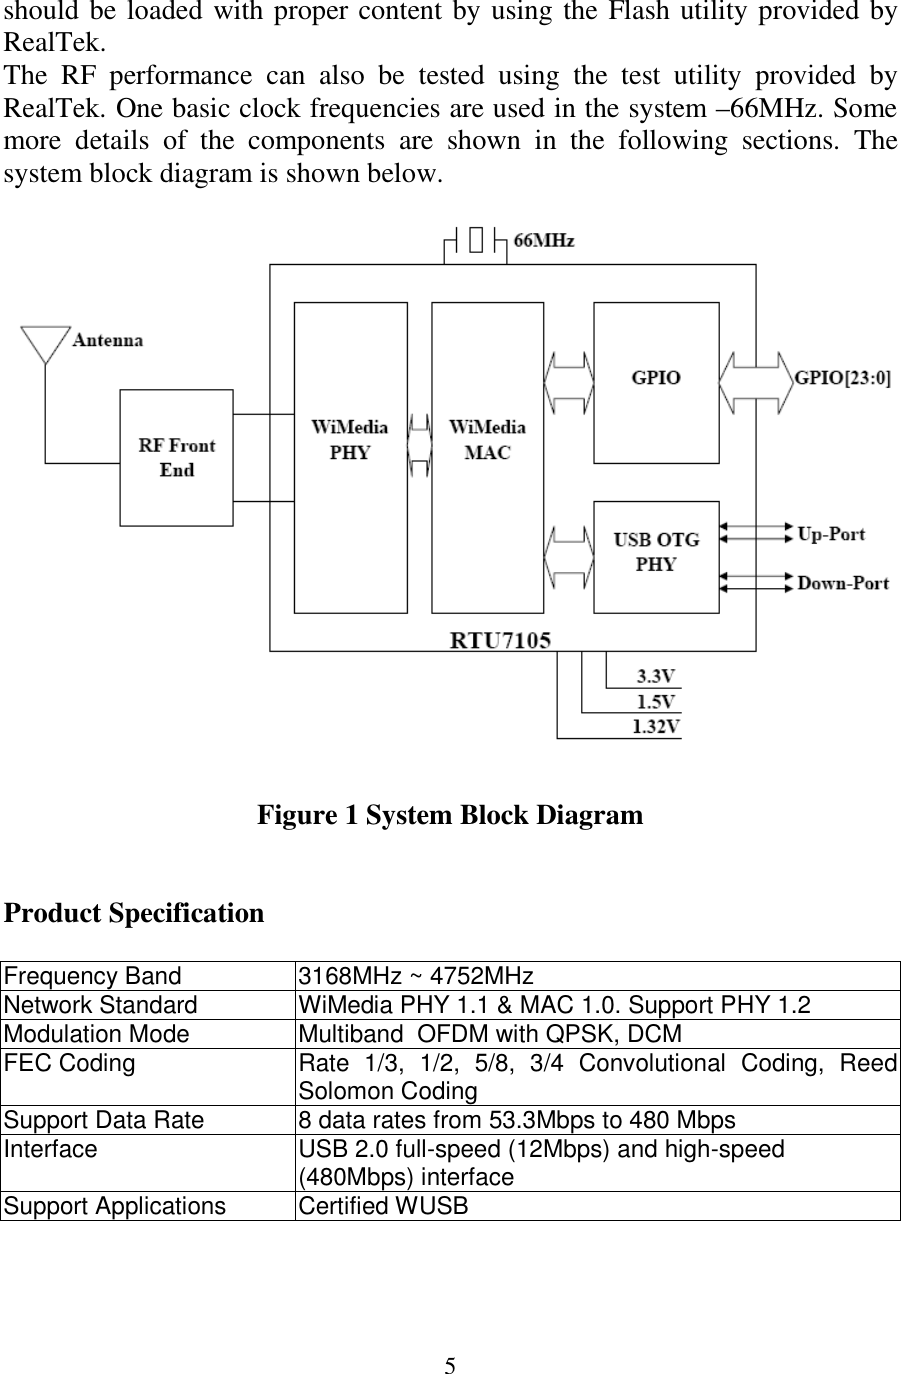 5 should be loaded with proper content by using the Flash utility provided by RealTek.  The  RF  performance  can  also  be  tested  using  the  test  utility  provided  by RealTek. One basic clock frequencies are used in the system –66MHz. Some more  details  of  the  components  are  shown  in  the  following  sections.  The system block diagram is shown below.    Figure 1 System Block Diagram   Product Specification  Frequency Band  3168MHz ~ 4752MHz Network Standard  WiMedia PHY 1.1 &amp; MAC 1.0. Support PHY 1.2 Modulation Mode  Multiband  OFDM with QPSK, DCM FEC Coding  Rate  1/3,  1/2,  5/8,  3/4  Convolutional  Coding,  Reed Solomon Coding  Support Data Rate  8 data rates from 53.3Mbps to 480 Mbps Interface  USB 2.0 full-speed (12Mbps) and high-speed (480Mbps) interface Support Applications  Certified WUSB   